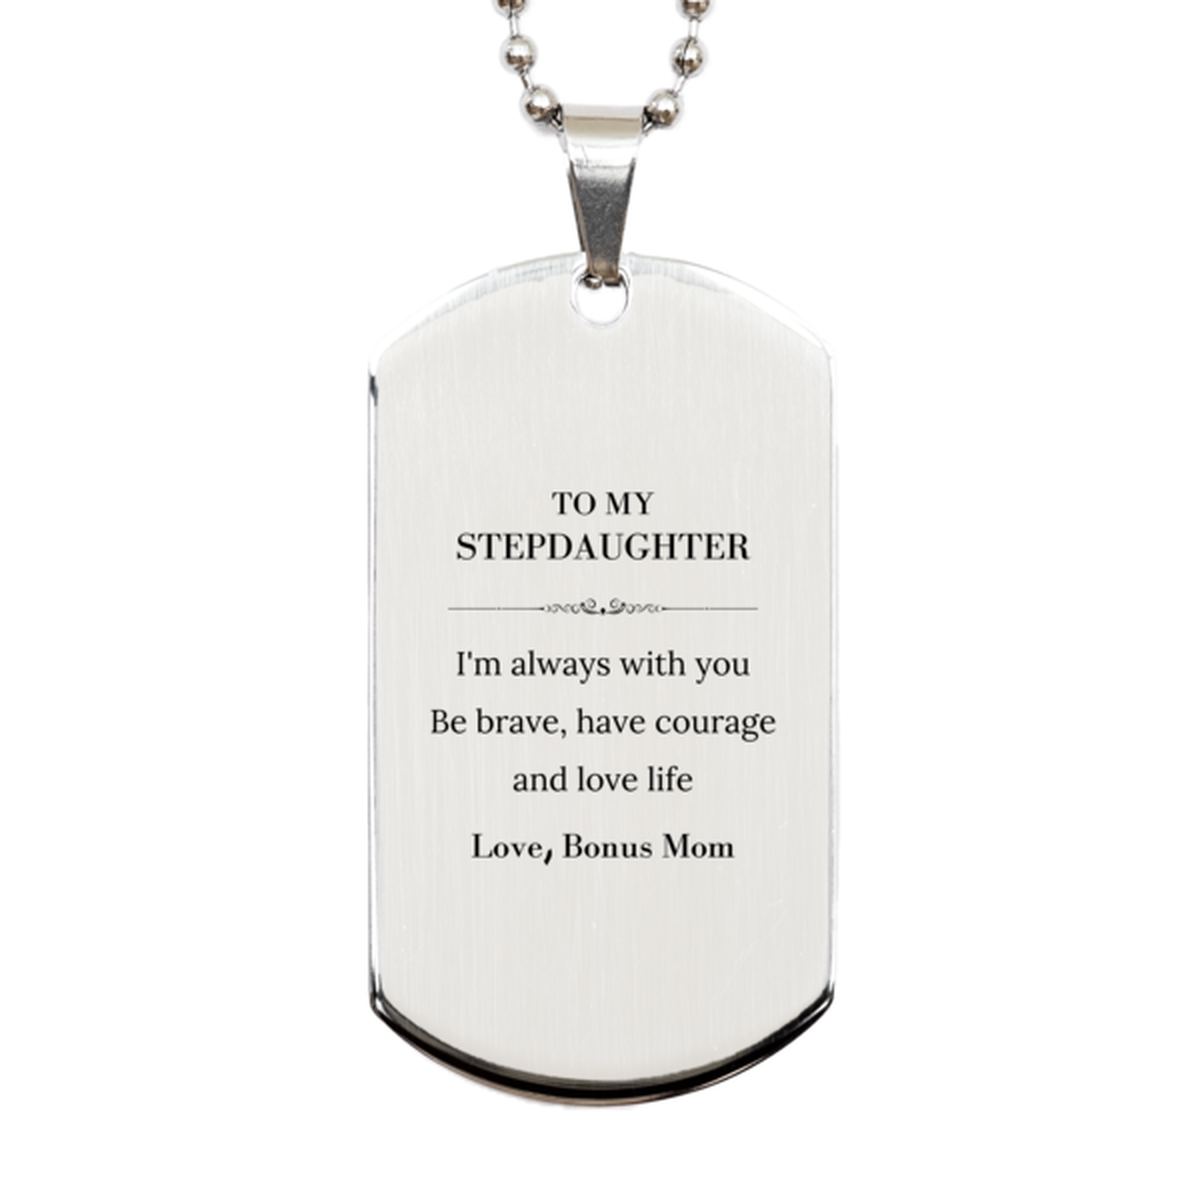 To My Stepdaughter Gifts from Bonus Mom, Unique Silver Dog Tag Inspirational Christmas Birthday Graduation Gifts for Stepdaughter I'm always with you. Be brave, have courage and love life. Love, Bonus Mom